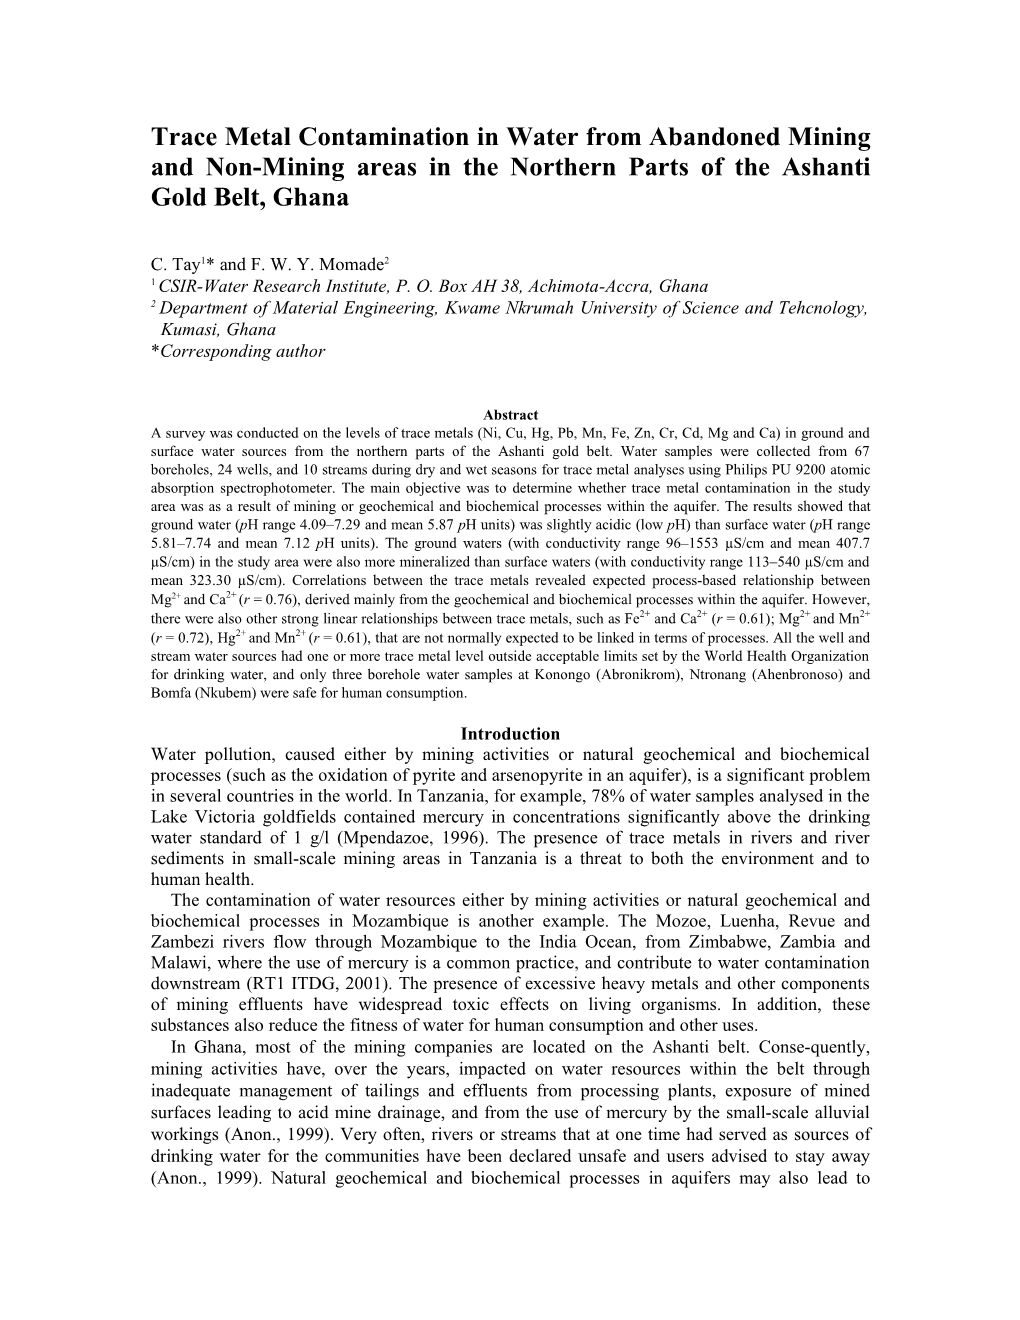 Trace Metal Contamination in Water from Abandoned Mining and Non-Mining Areas in the Northern Parts of the Ashanti Gold Belt, Ghana